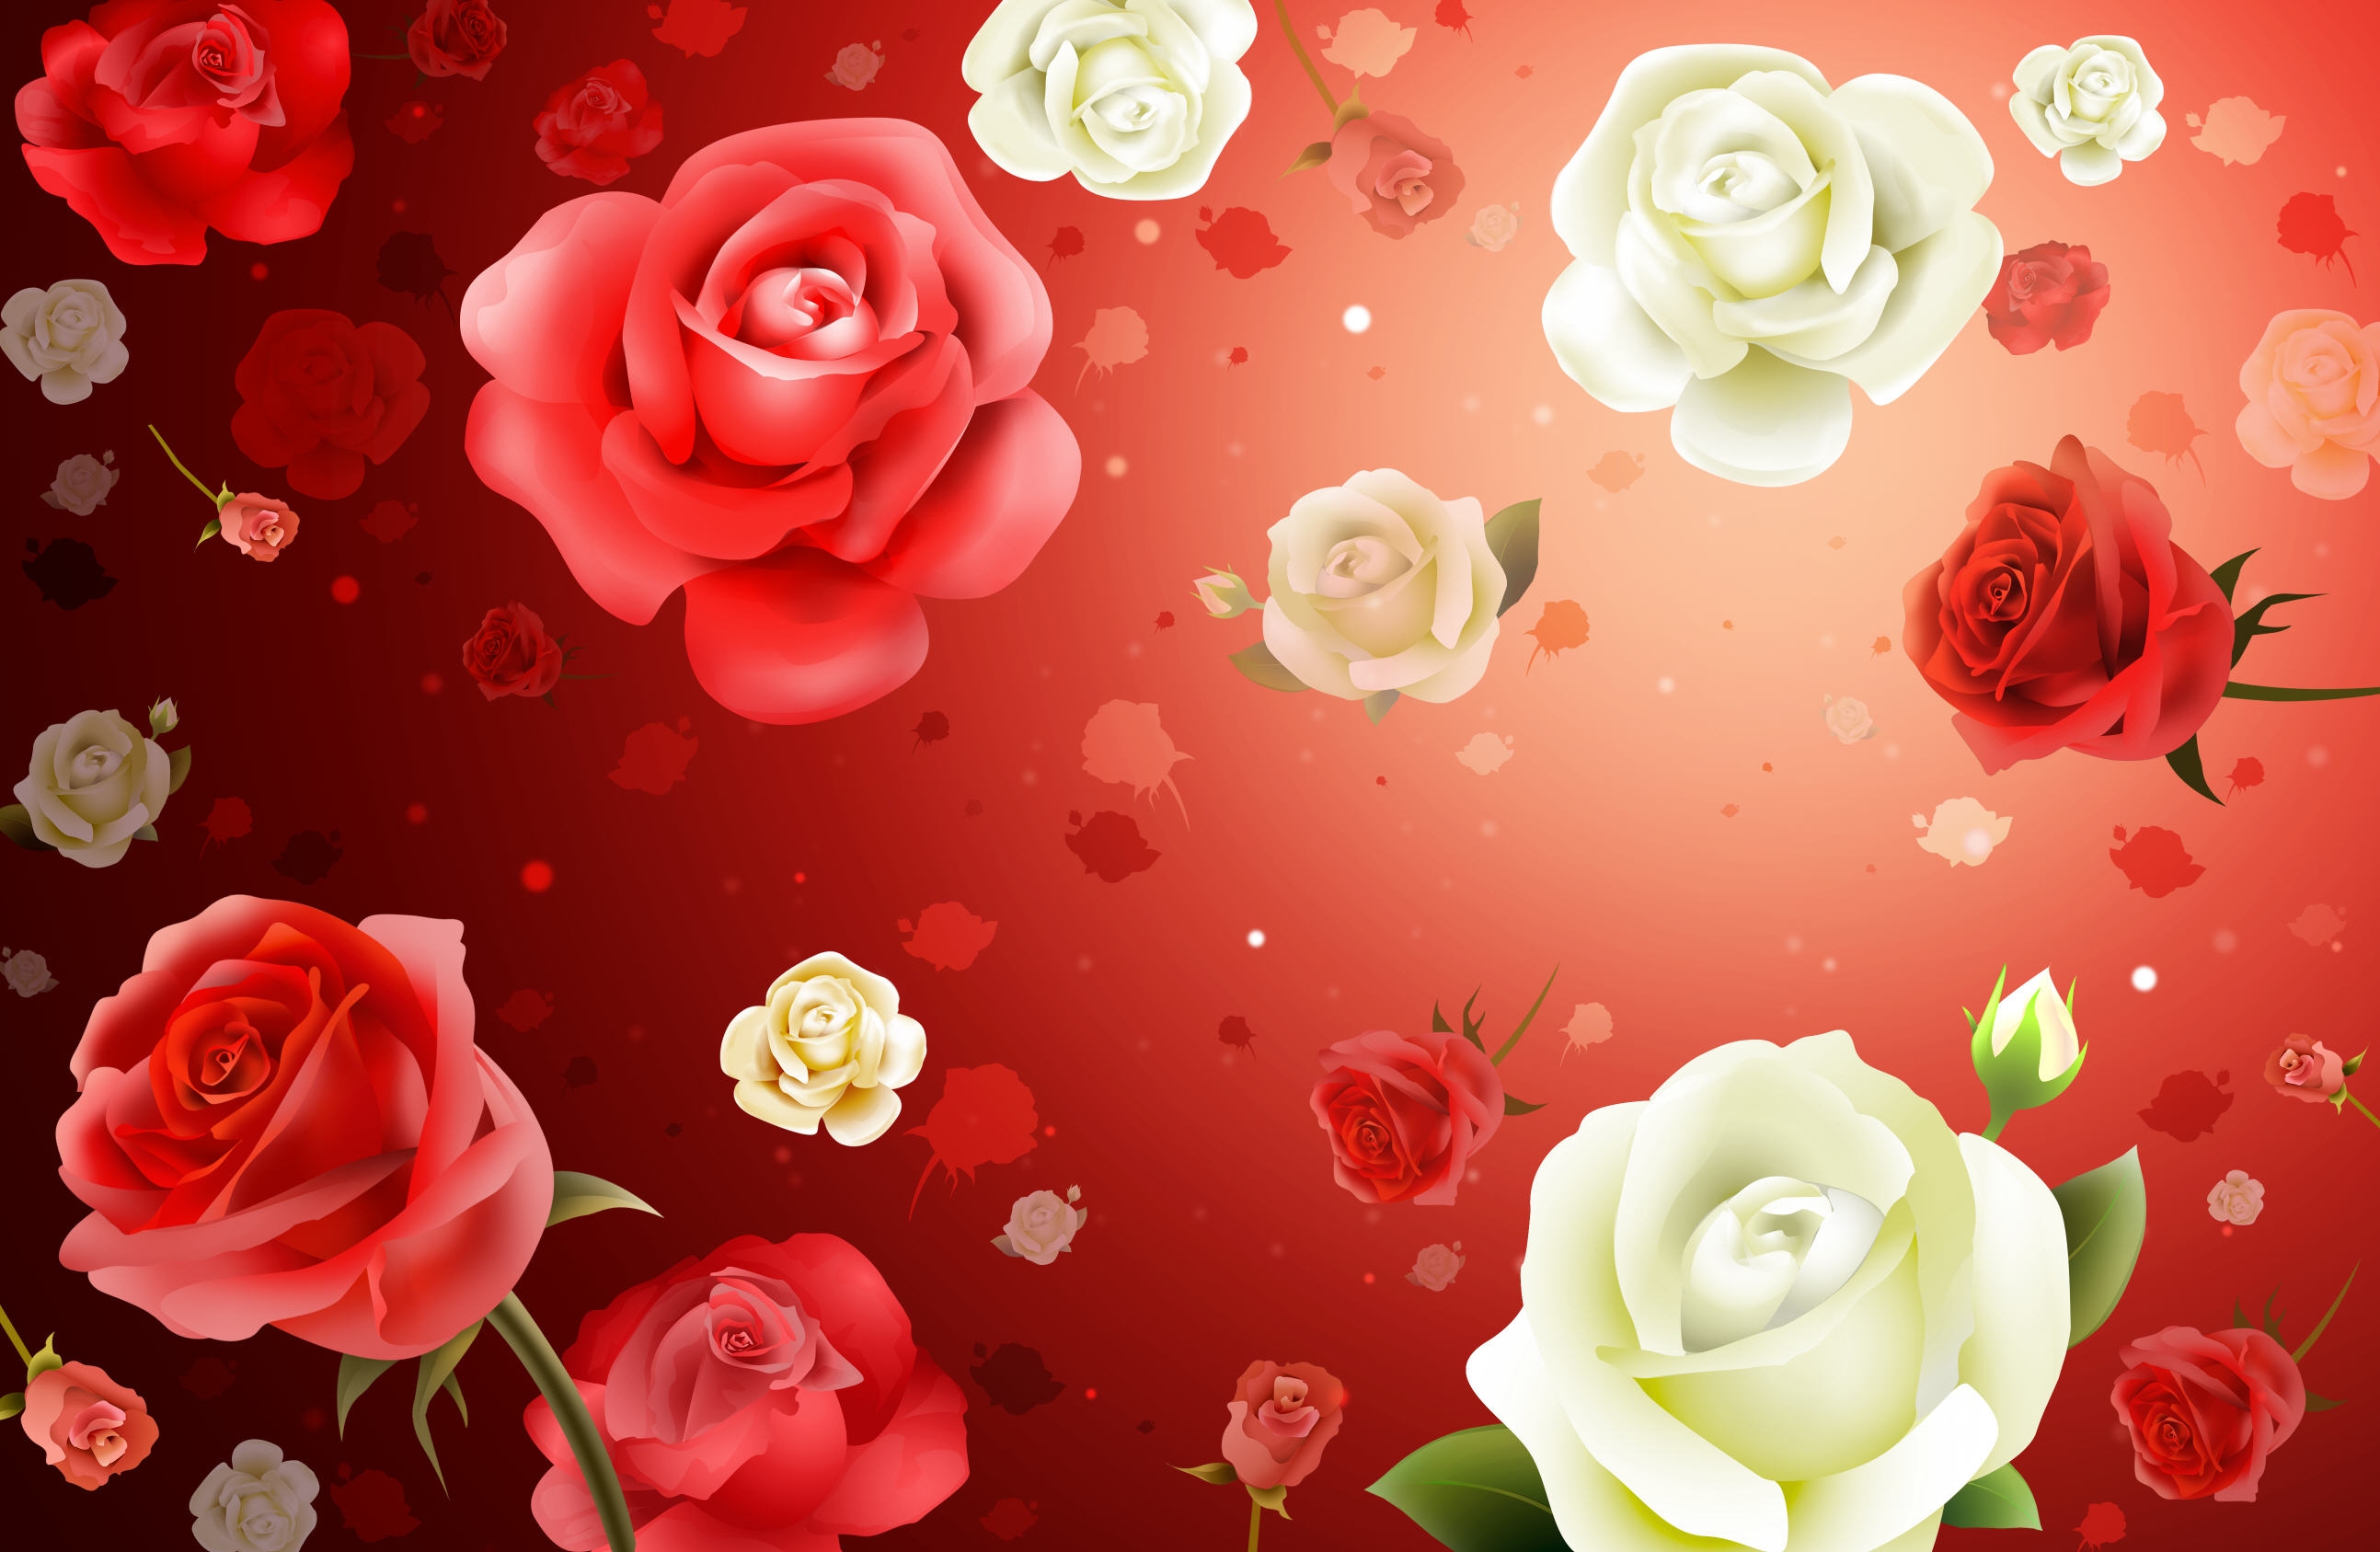 flowers, background, roses, texture, textures